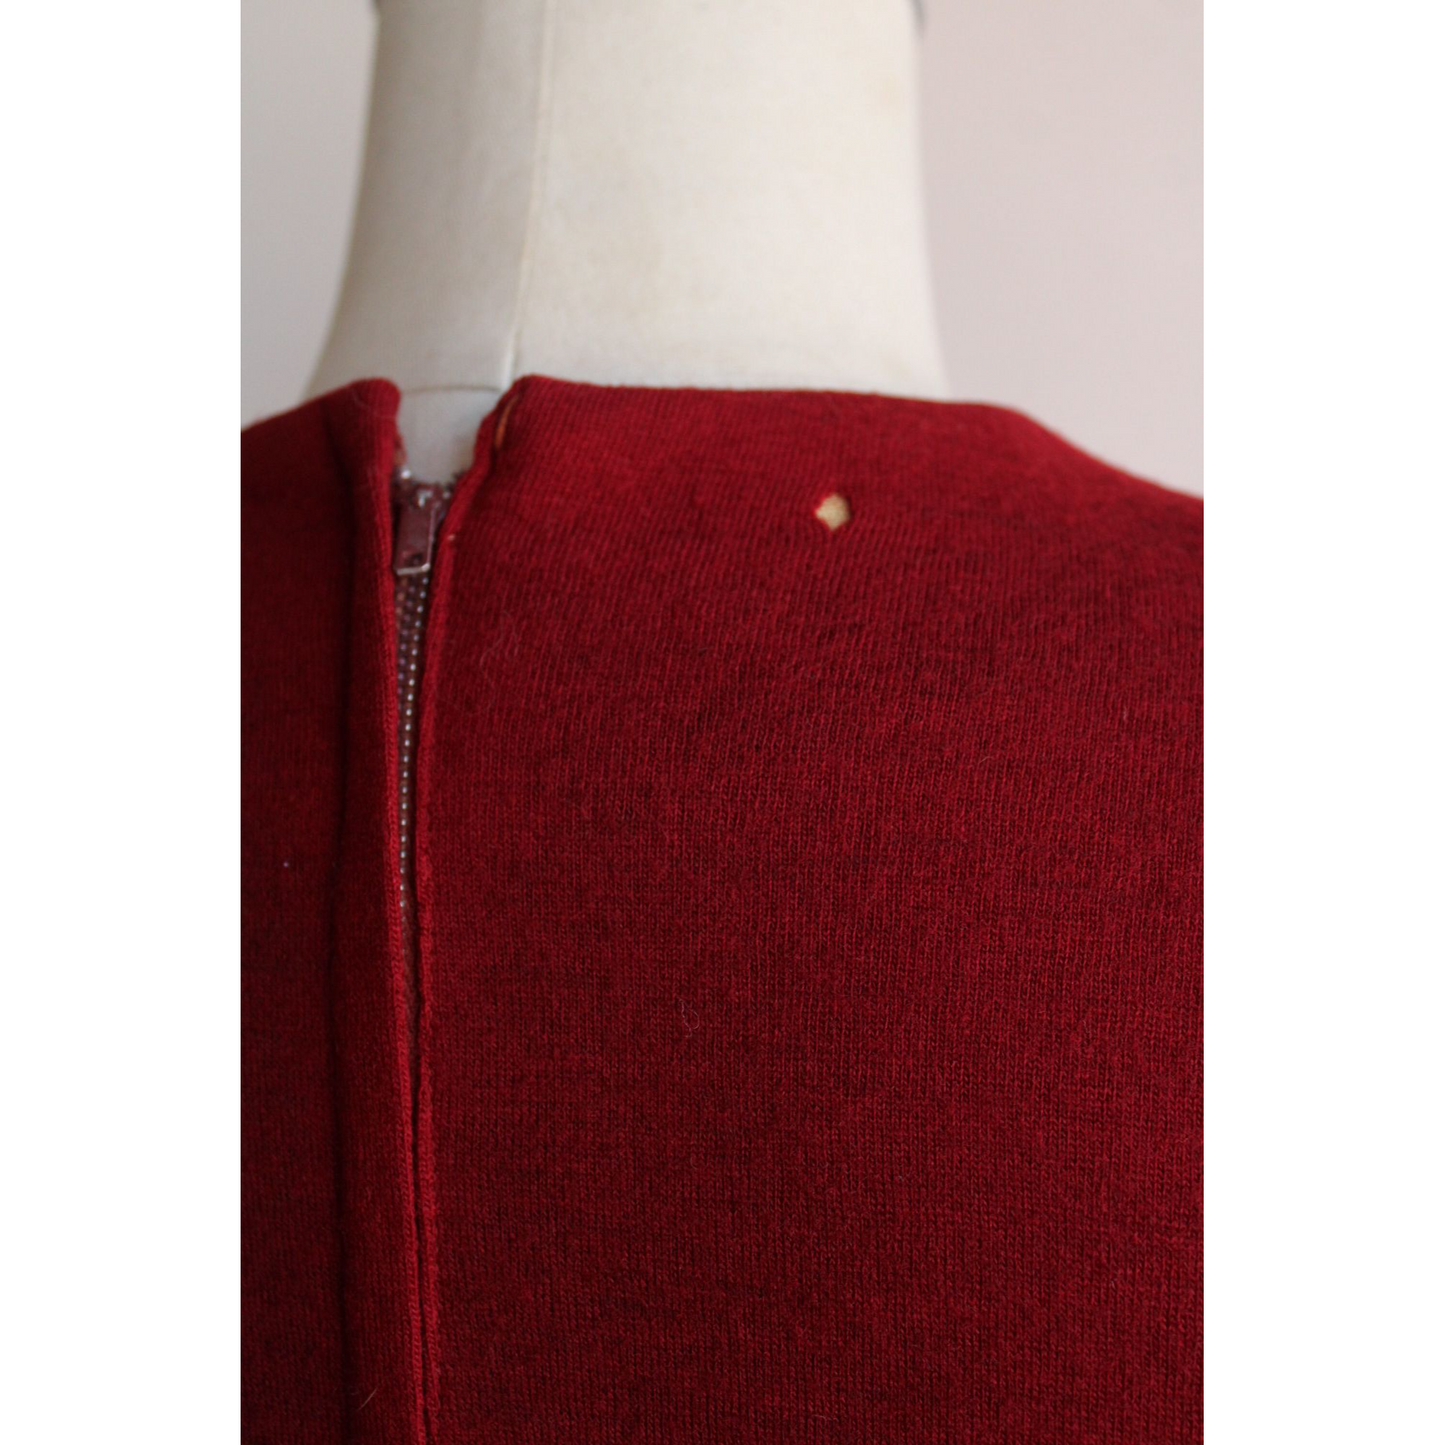 Vintage 1950s Harry S Epstein Red Wool Wiggle Dress